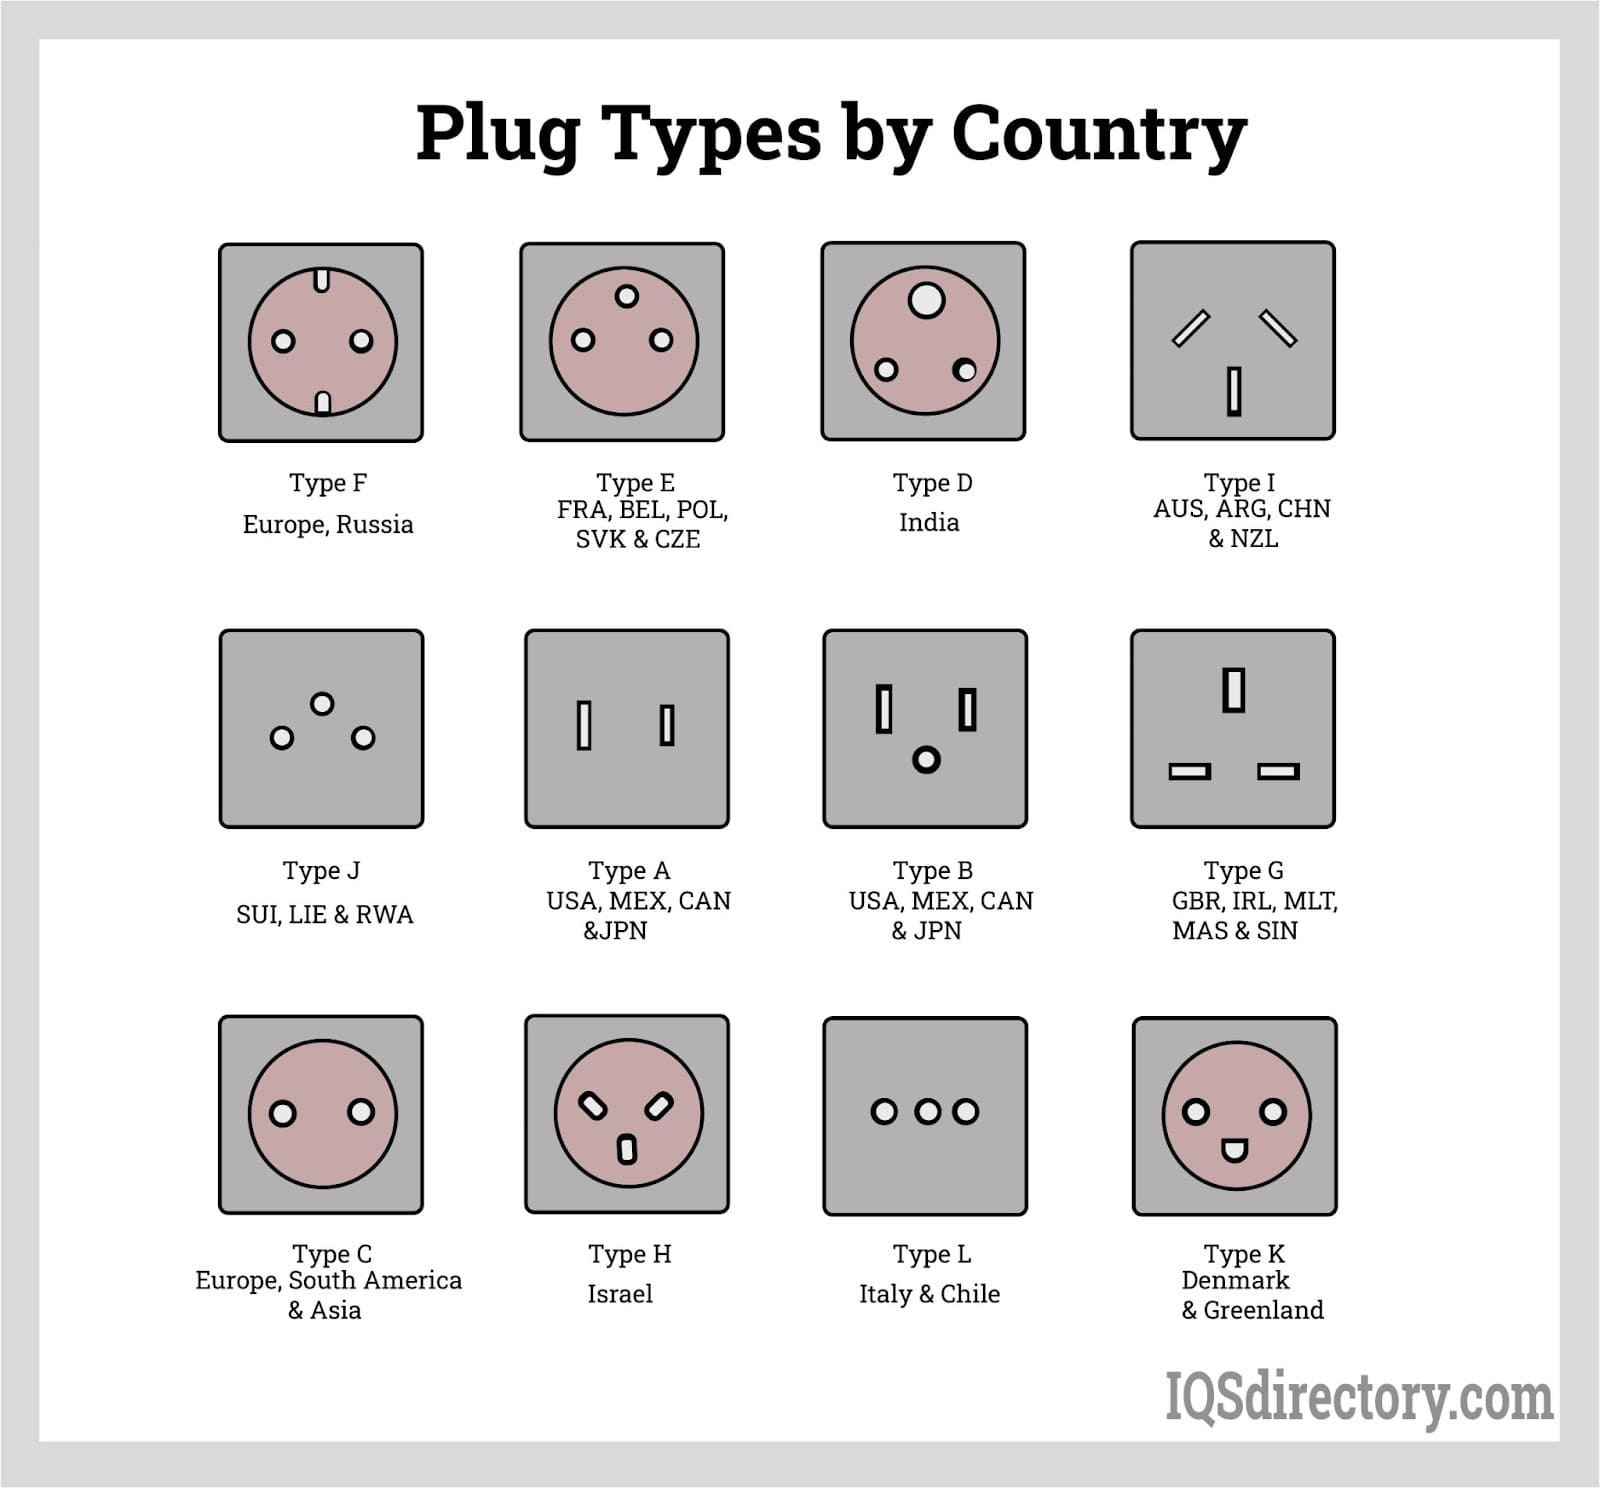 Plug Types by Country